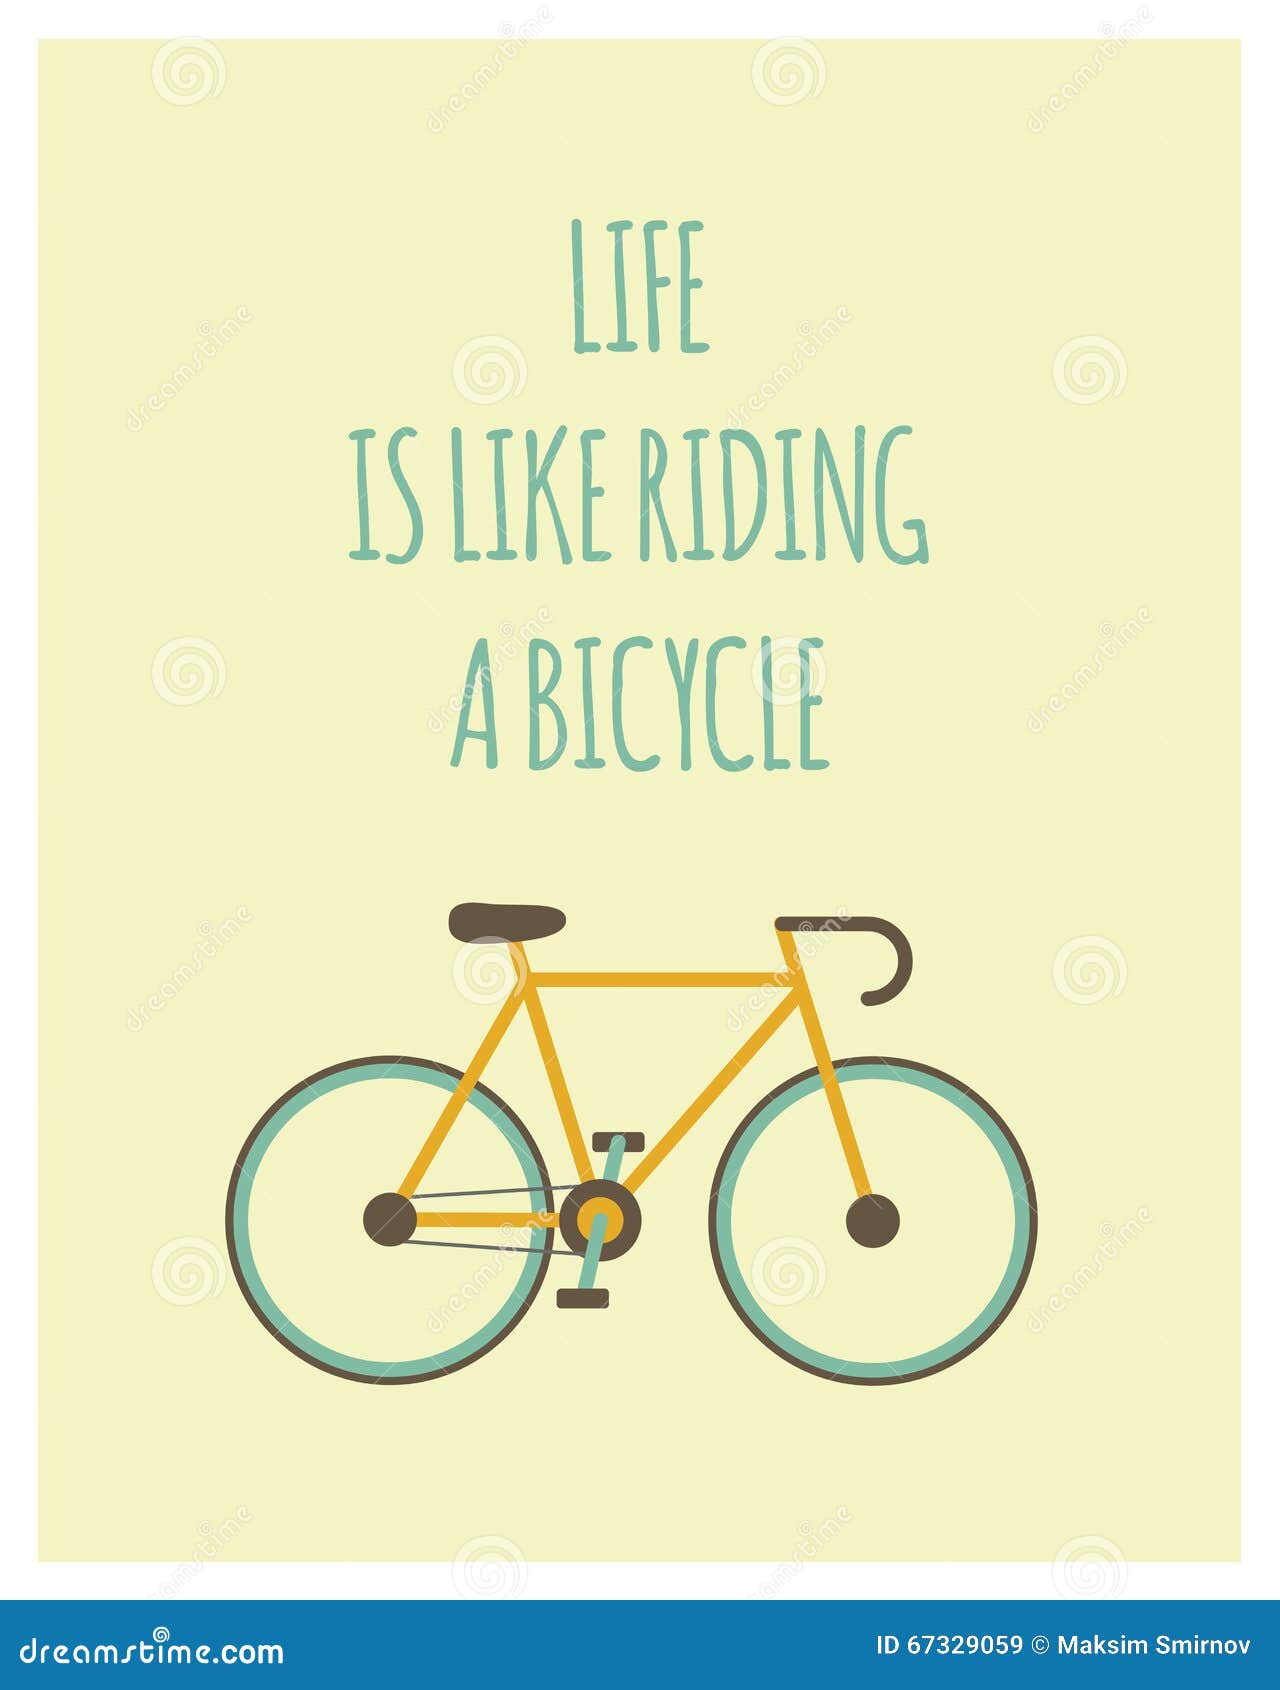 Minimal Bicycle In Hipster Style Stock Vector Image 67329059 for cycling is like life regarding Found Home